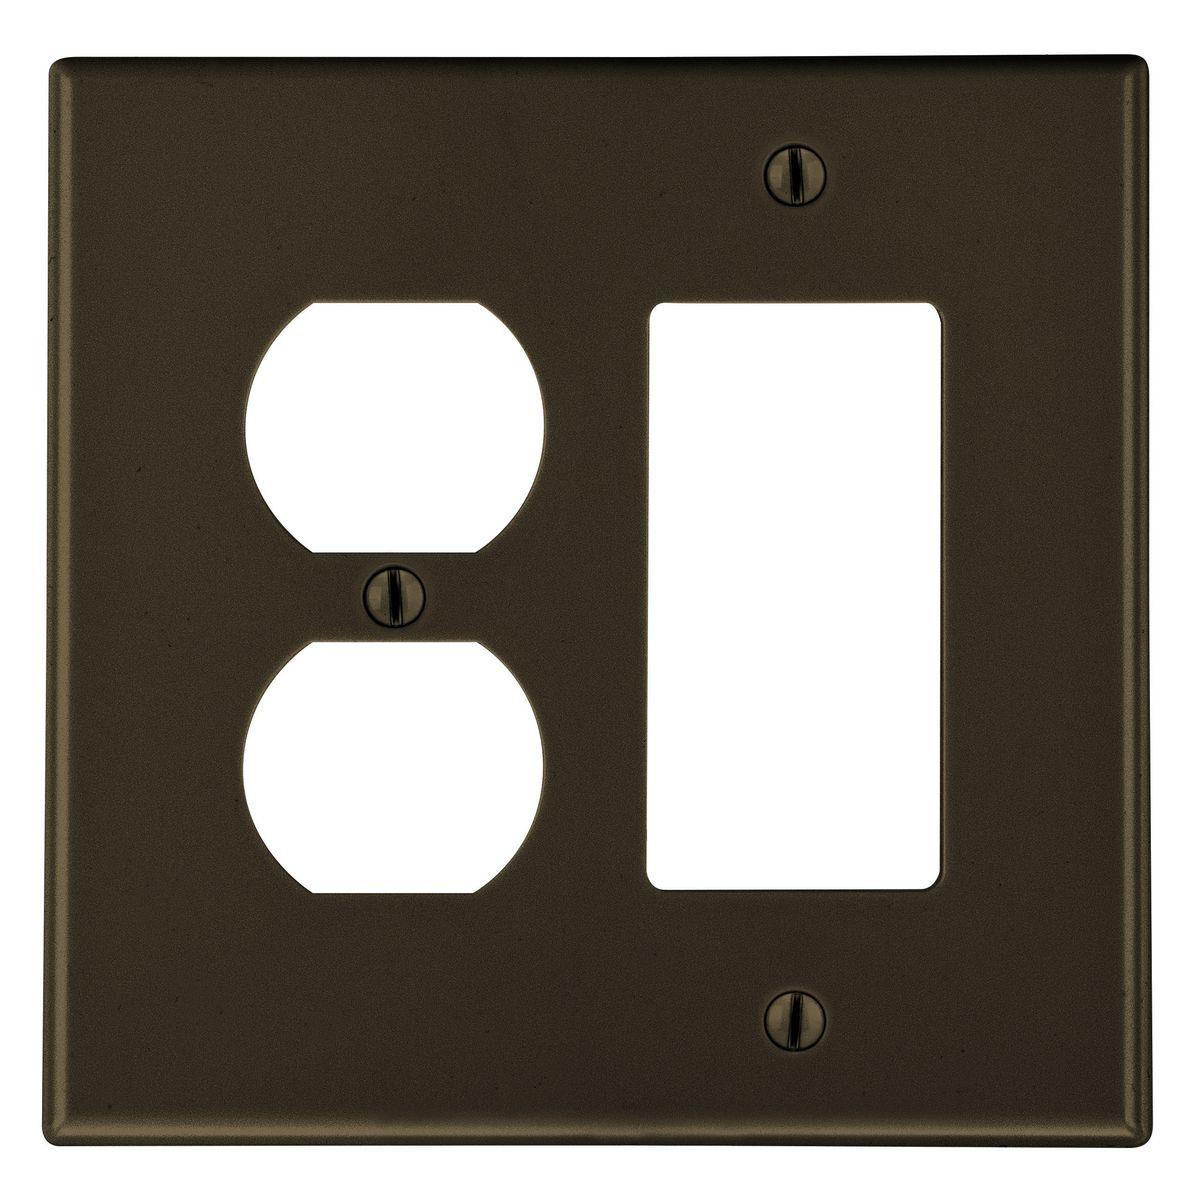 Hubbell P826 Wallplate, 2-Gang,  1) Duplex 1) Decorator, Brown  ; High-impact, self-extinguishing polycarbonate material ; More Rigid ; Sharp lines and less dimpling ; Smooth satin finish ; Blends into wall with an optimum finish ; Smooth Satin Finish